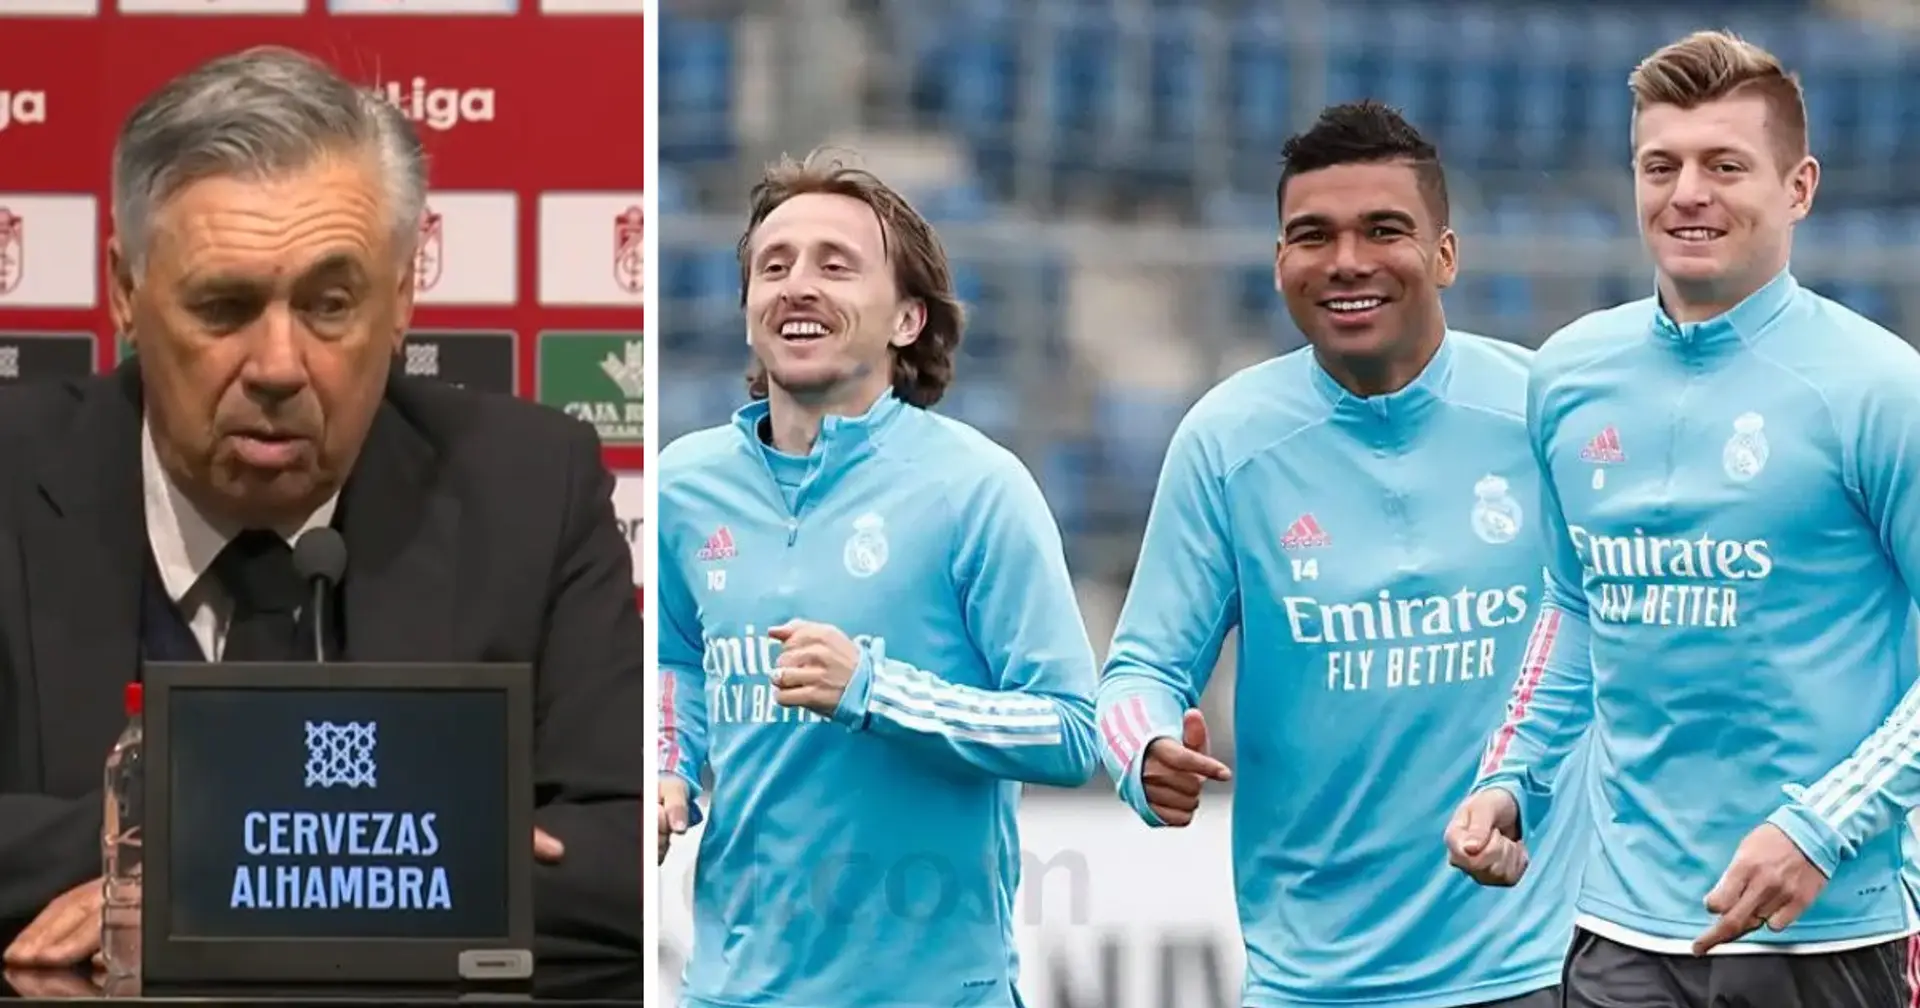 Ancelotti explains why he doesn't want to give instructions to Modric, Kroos and Casemiro